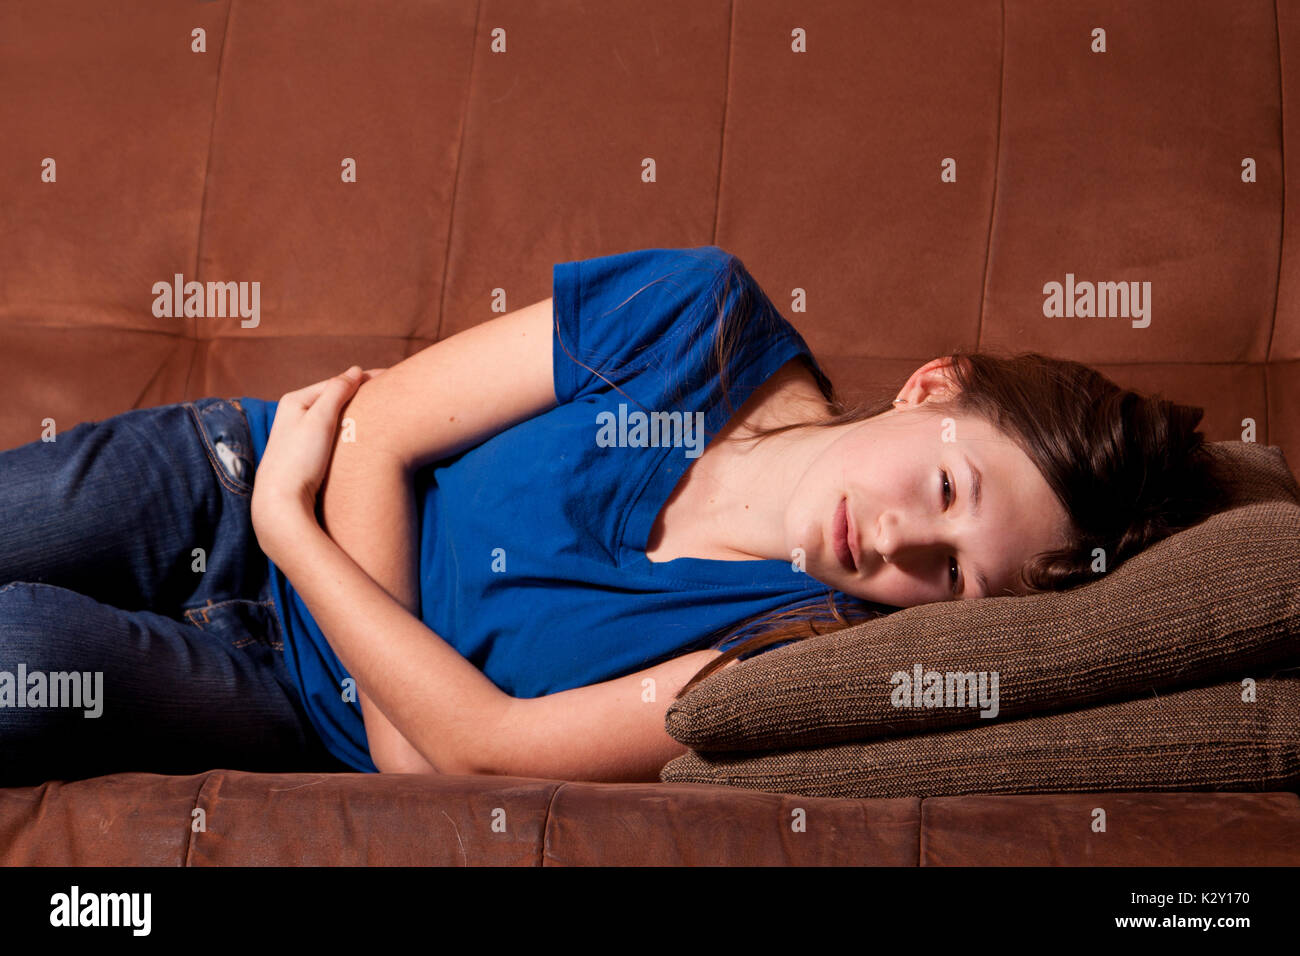 Young teenage girl holding stomach with an illness lying on a couch. Stock Photo